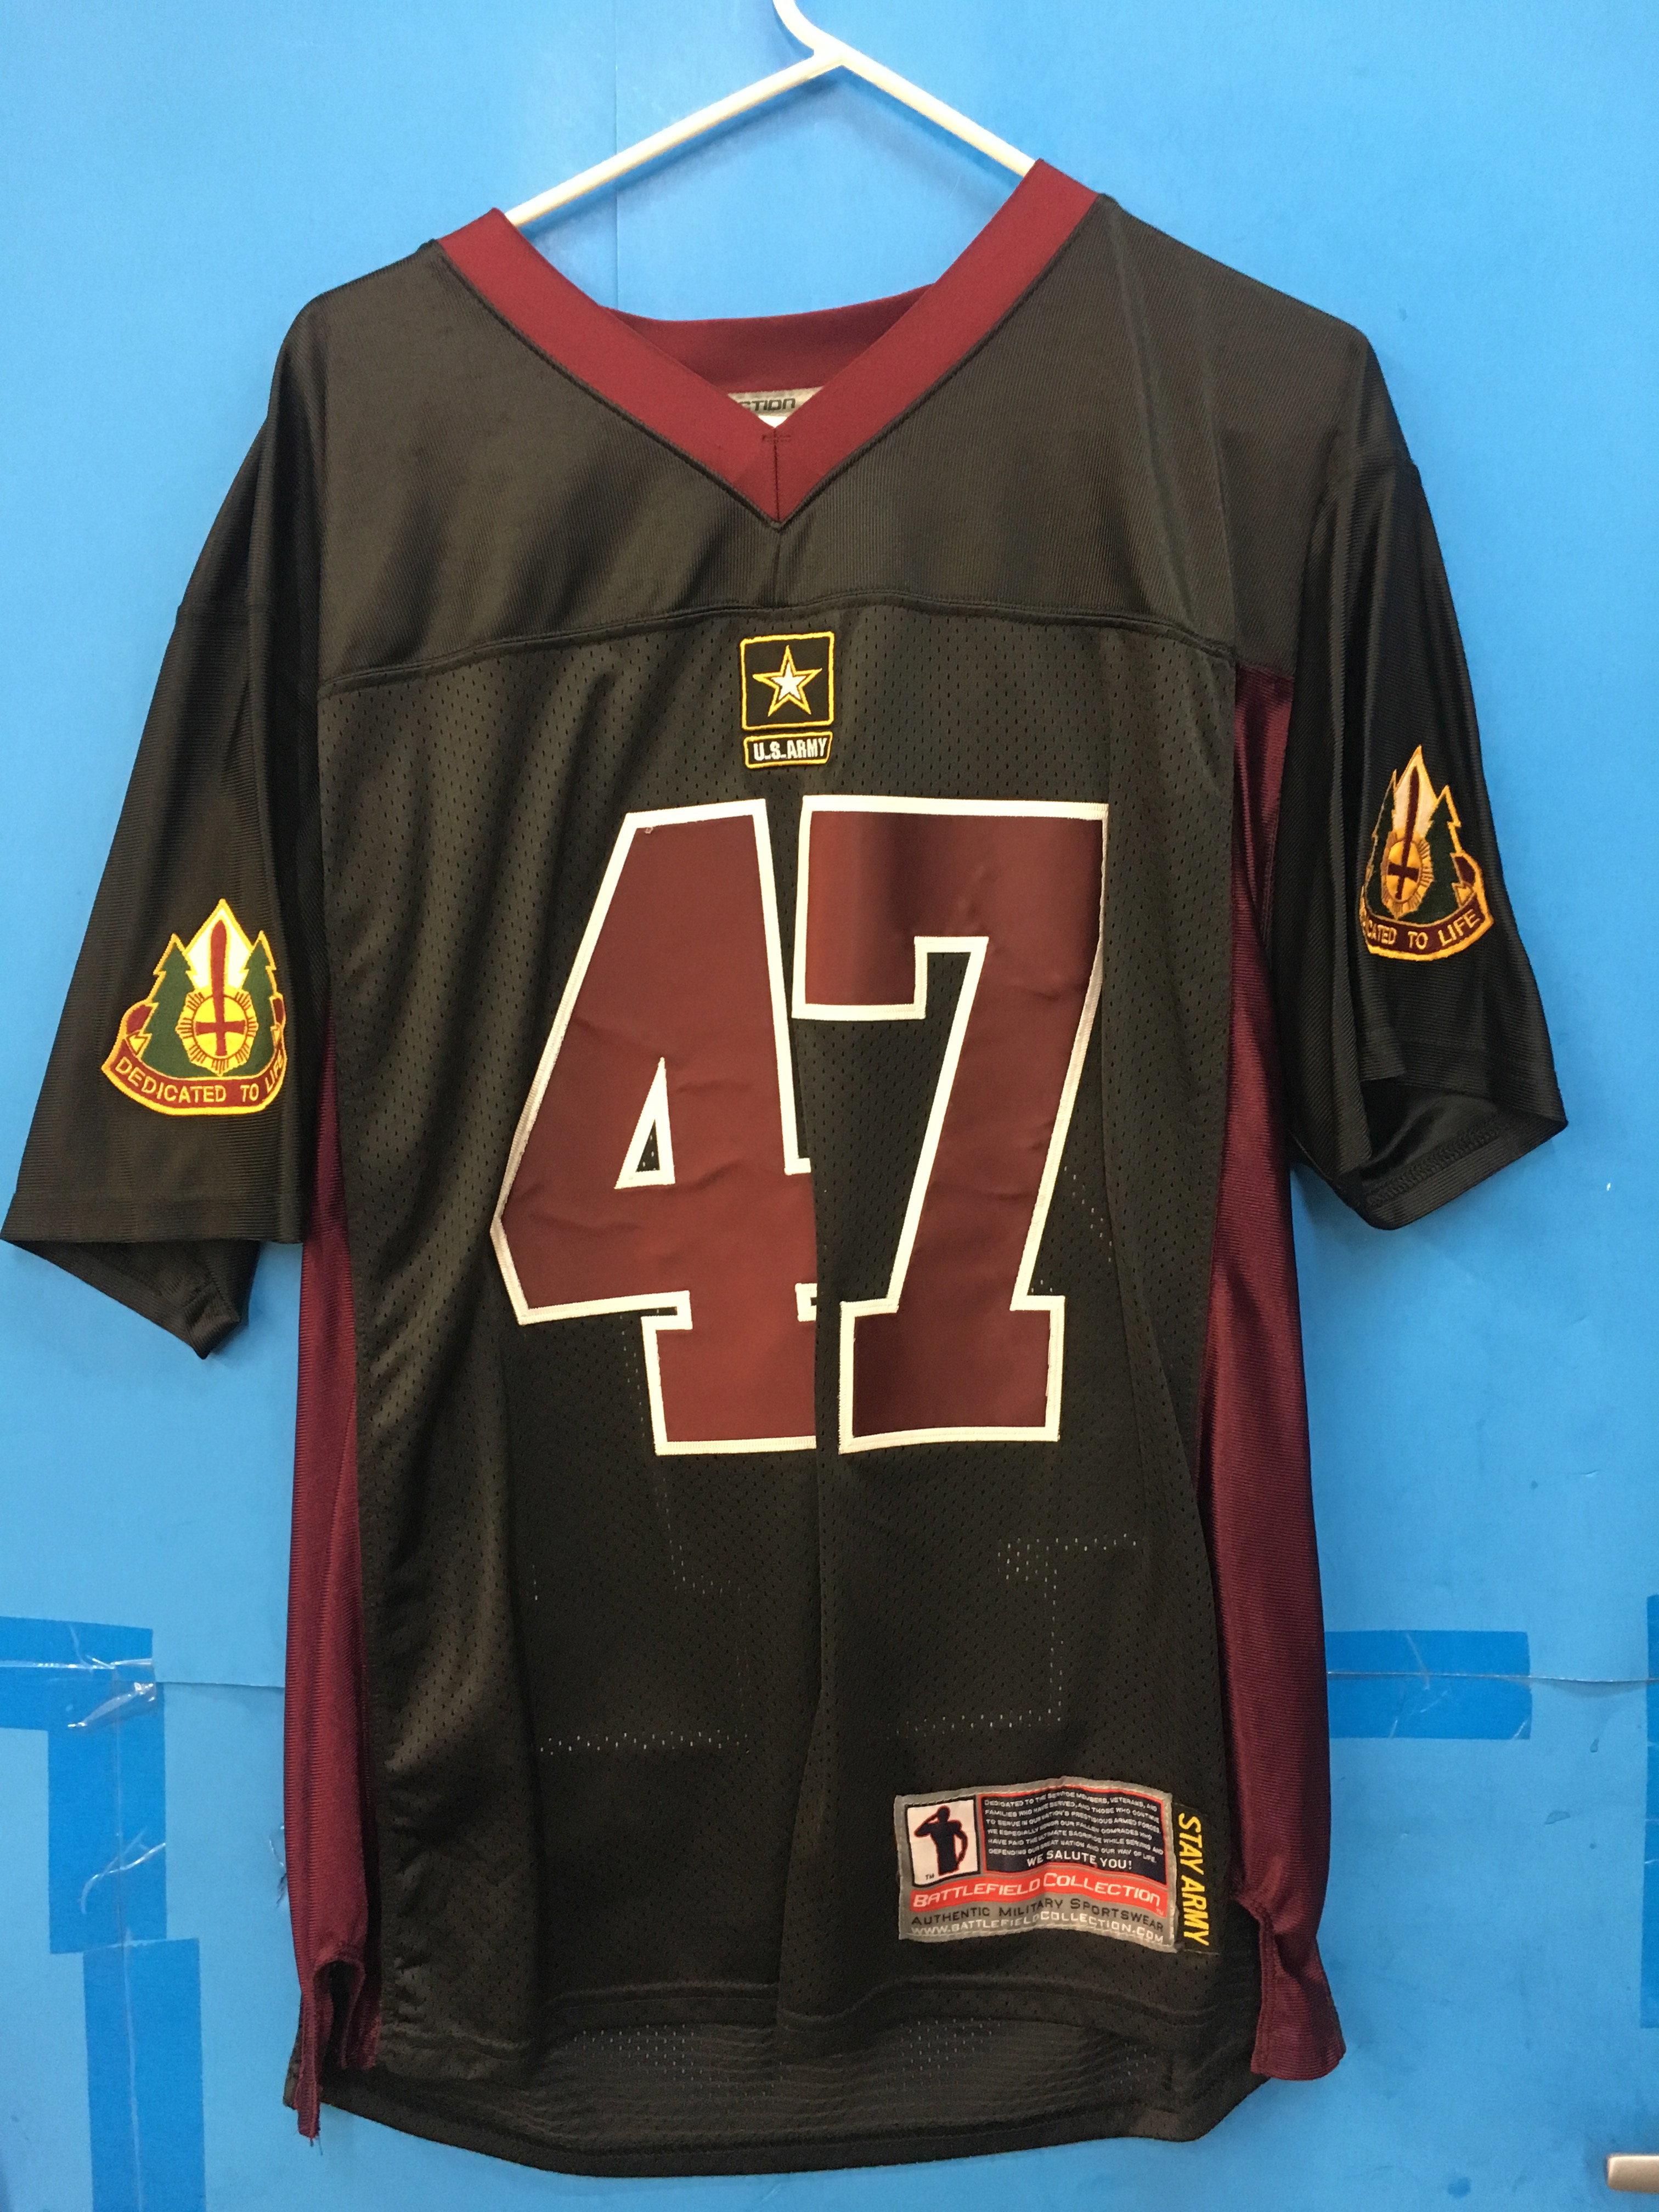 United States Army Battlefield Collection Black and Maroon Stitched Number Jersey - Size Large